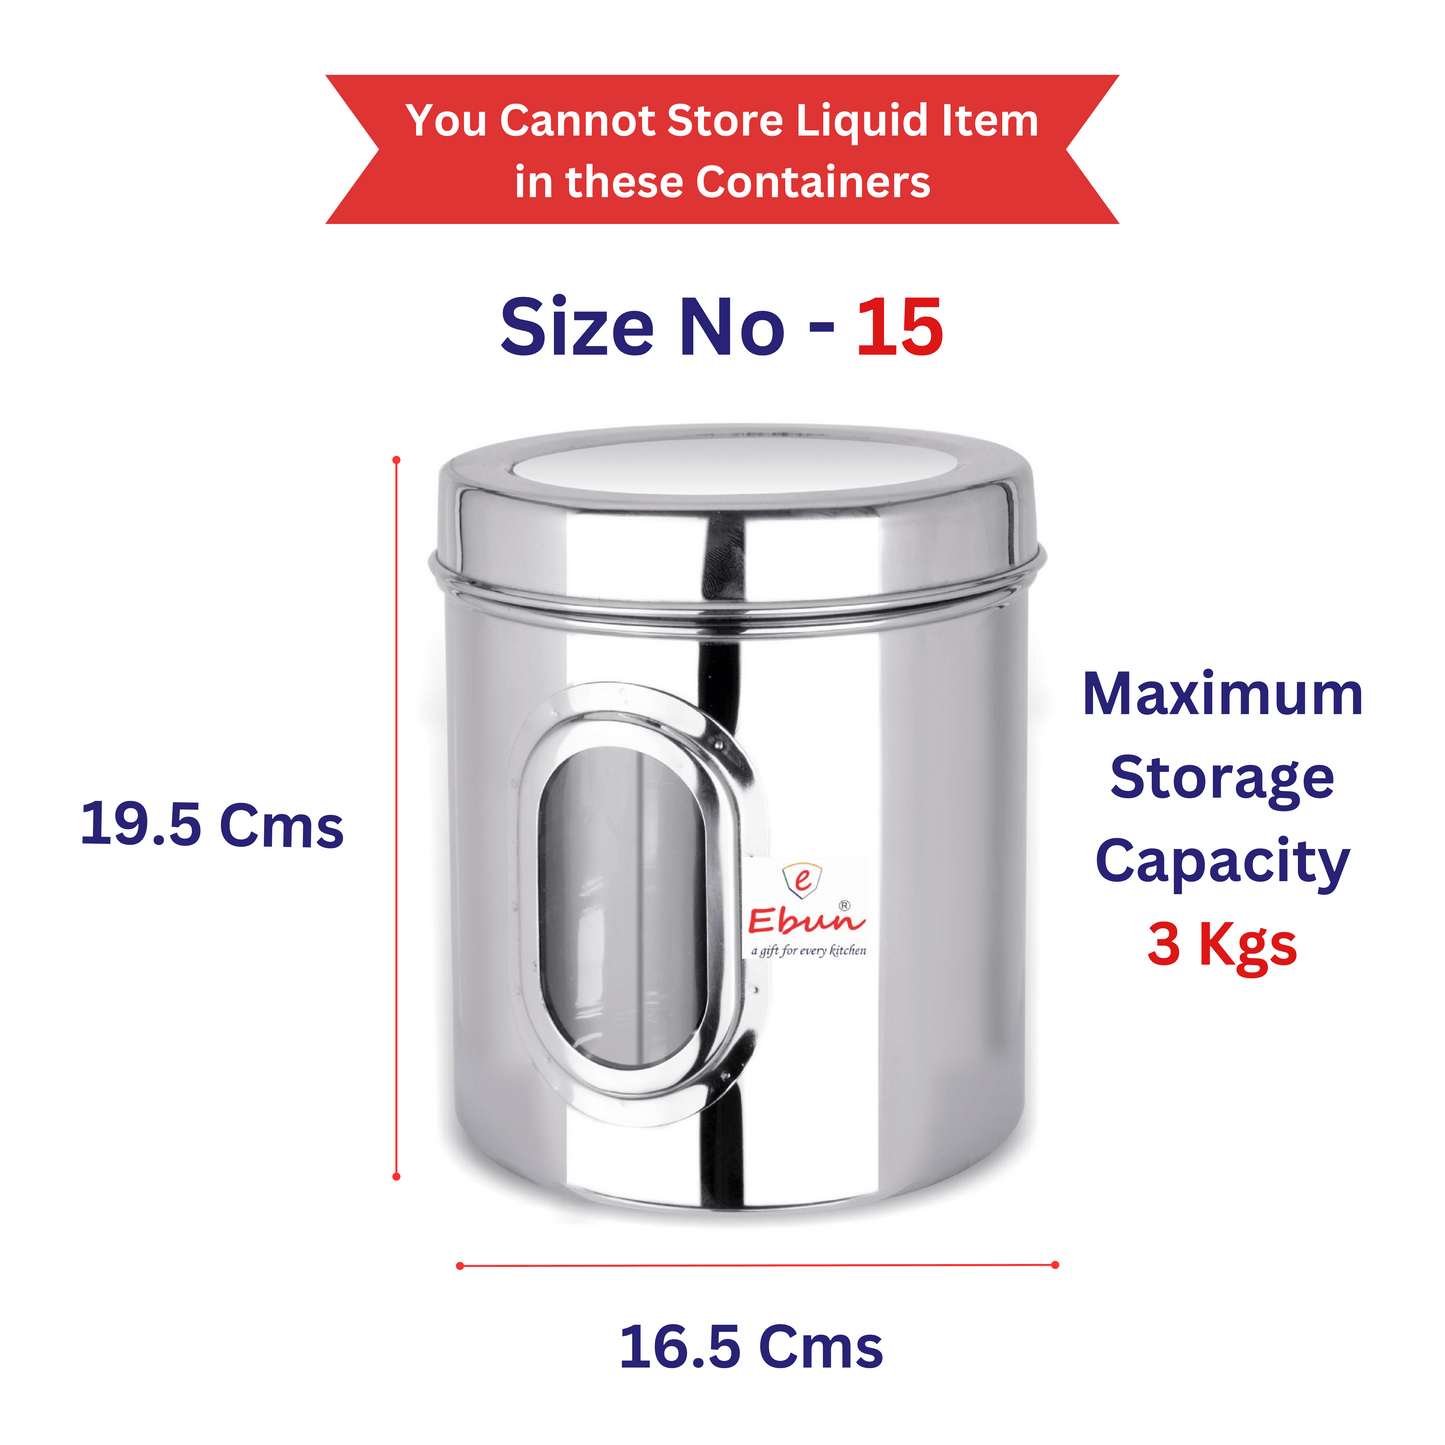 stainless steel containers | steel storage containers for kitchen | steel container | steel container with lid | kitchen containers set steel | steel container for kitchen storage set | steel containers | stainless steel storage containers | stainless steel containers with lid | kitchen steel containers set | stainless steel container | steel airtight container | steel storage containers | Steel dabba | steel containers for kitchen 2kg